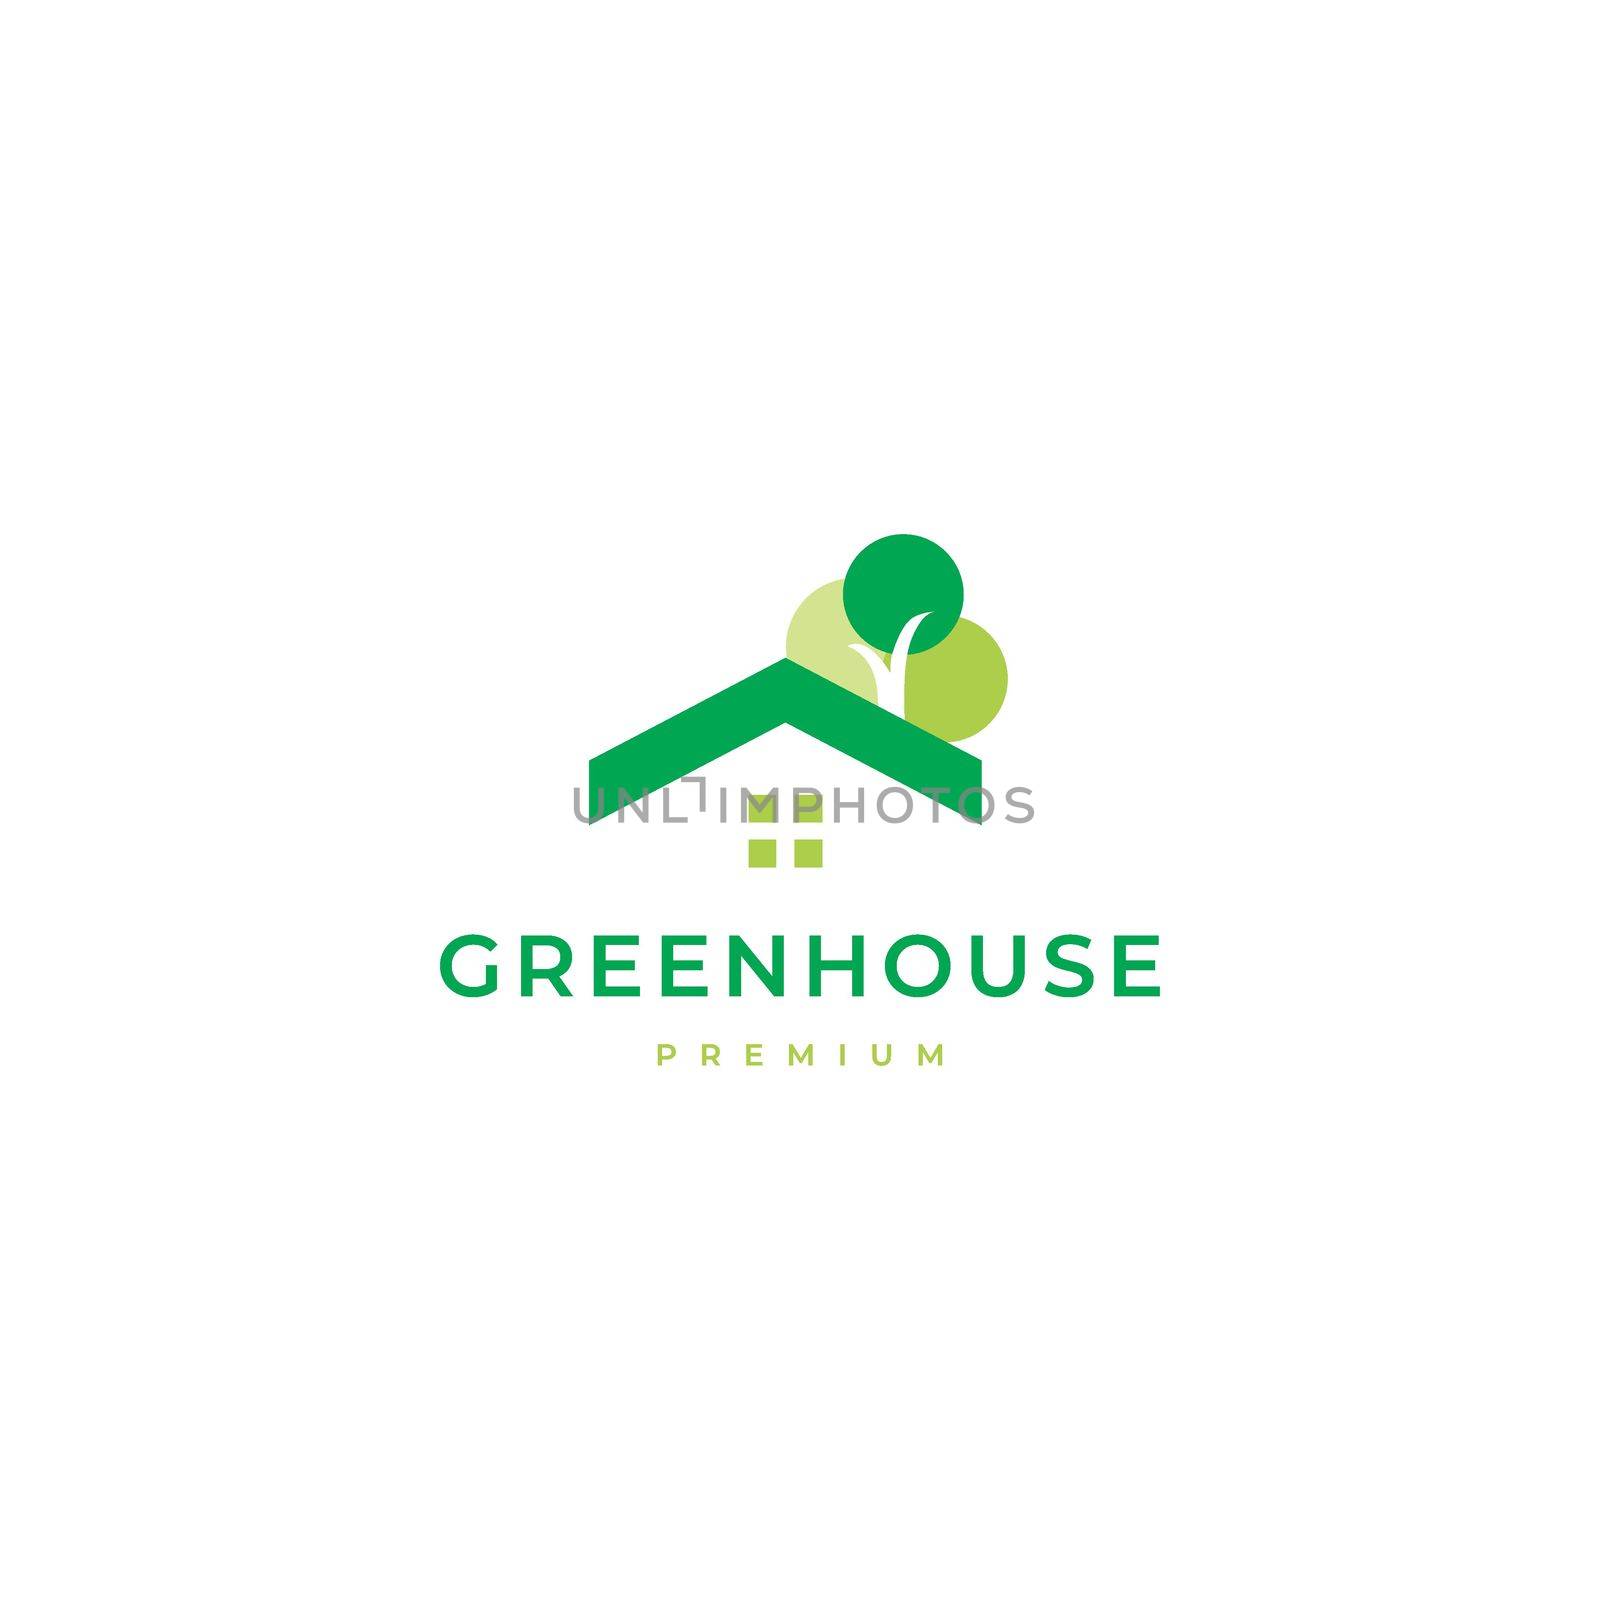 nature roof house with tree logo. eco friendly home sign vector elements stock illustration by IreIru